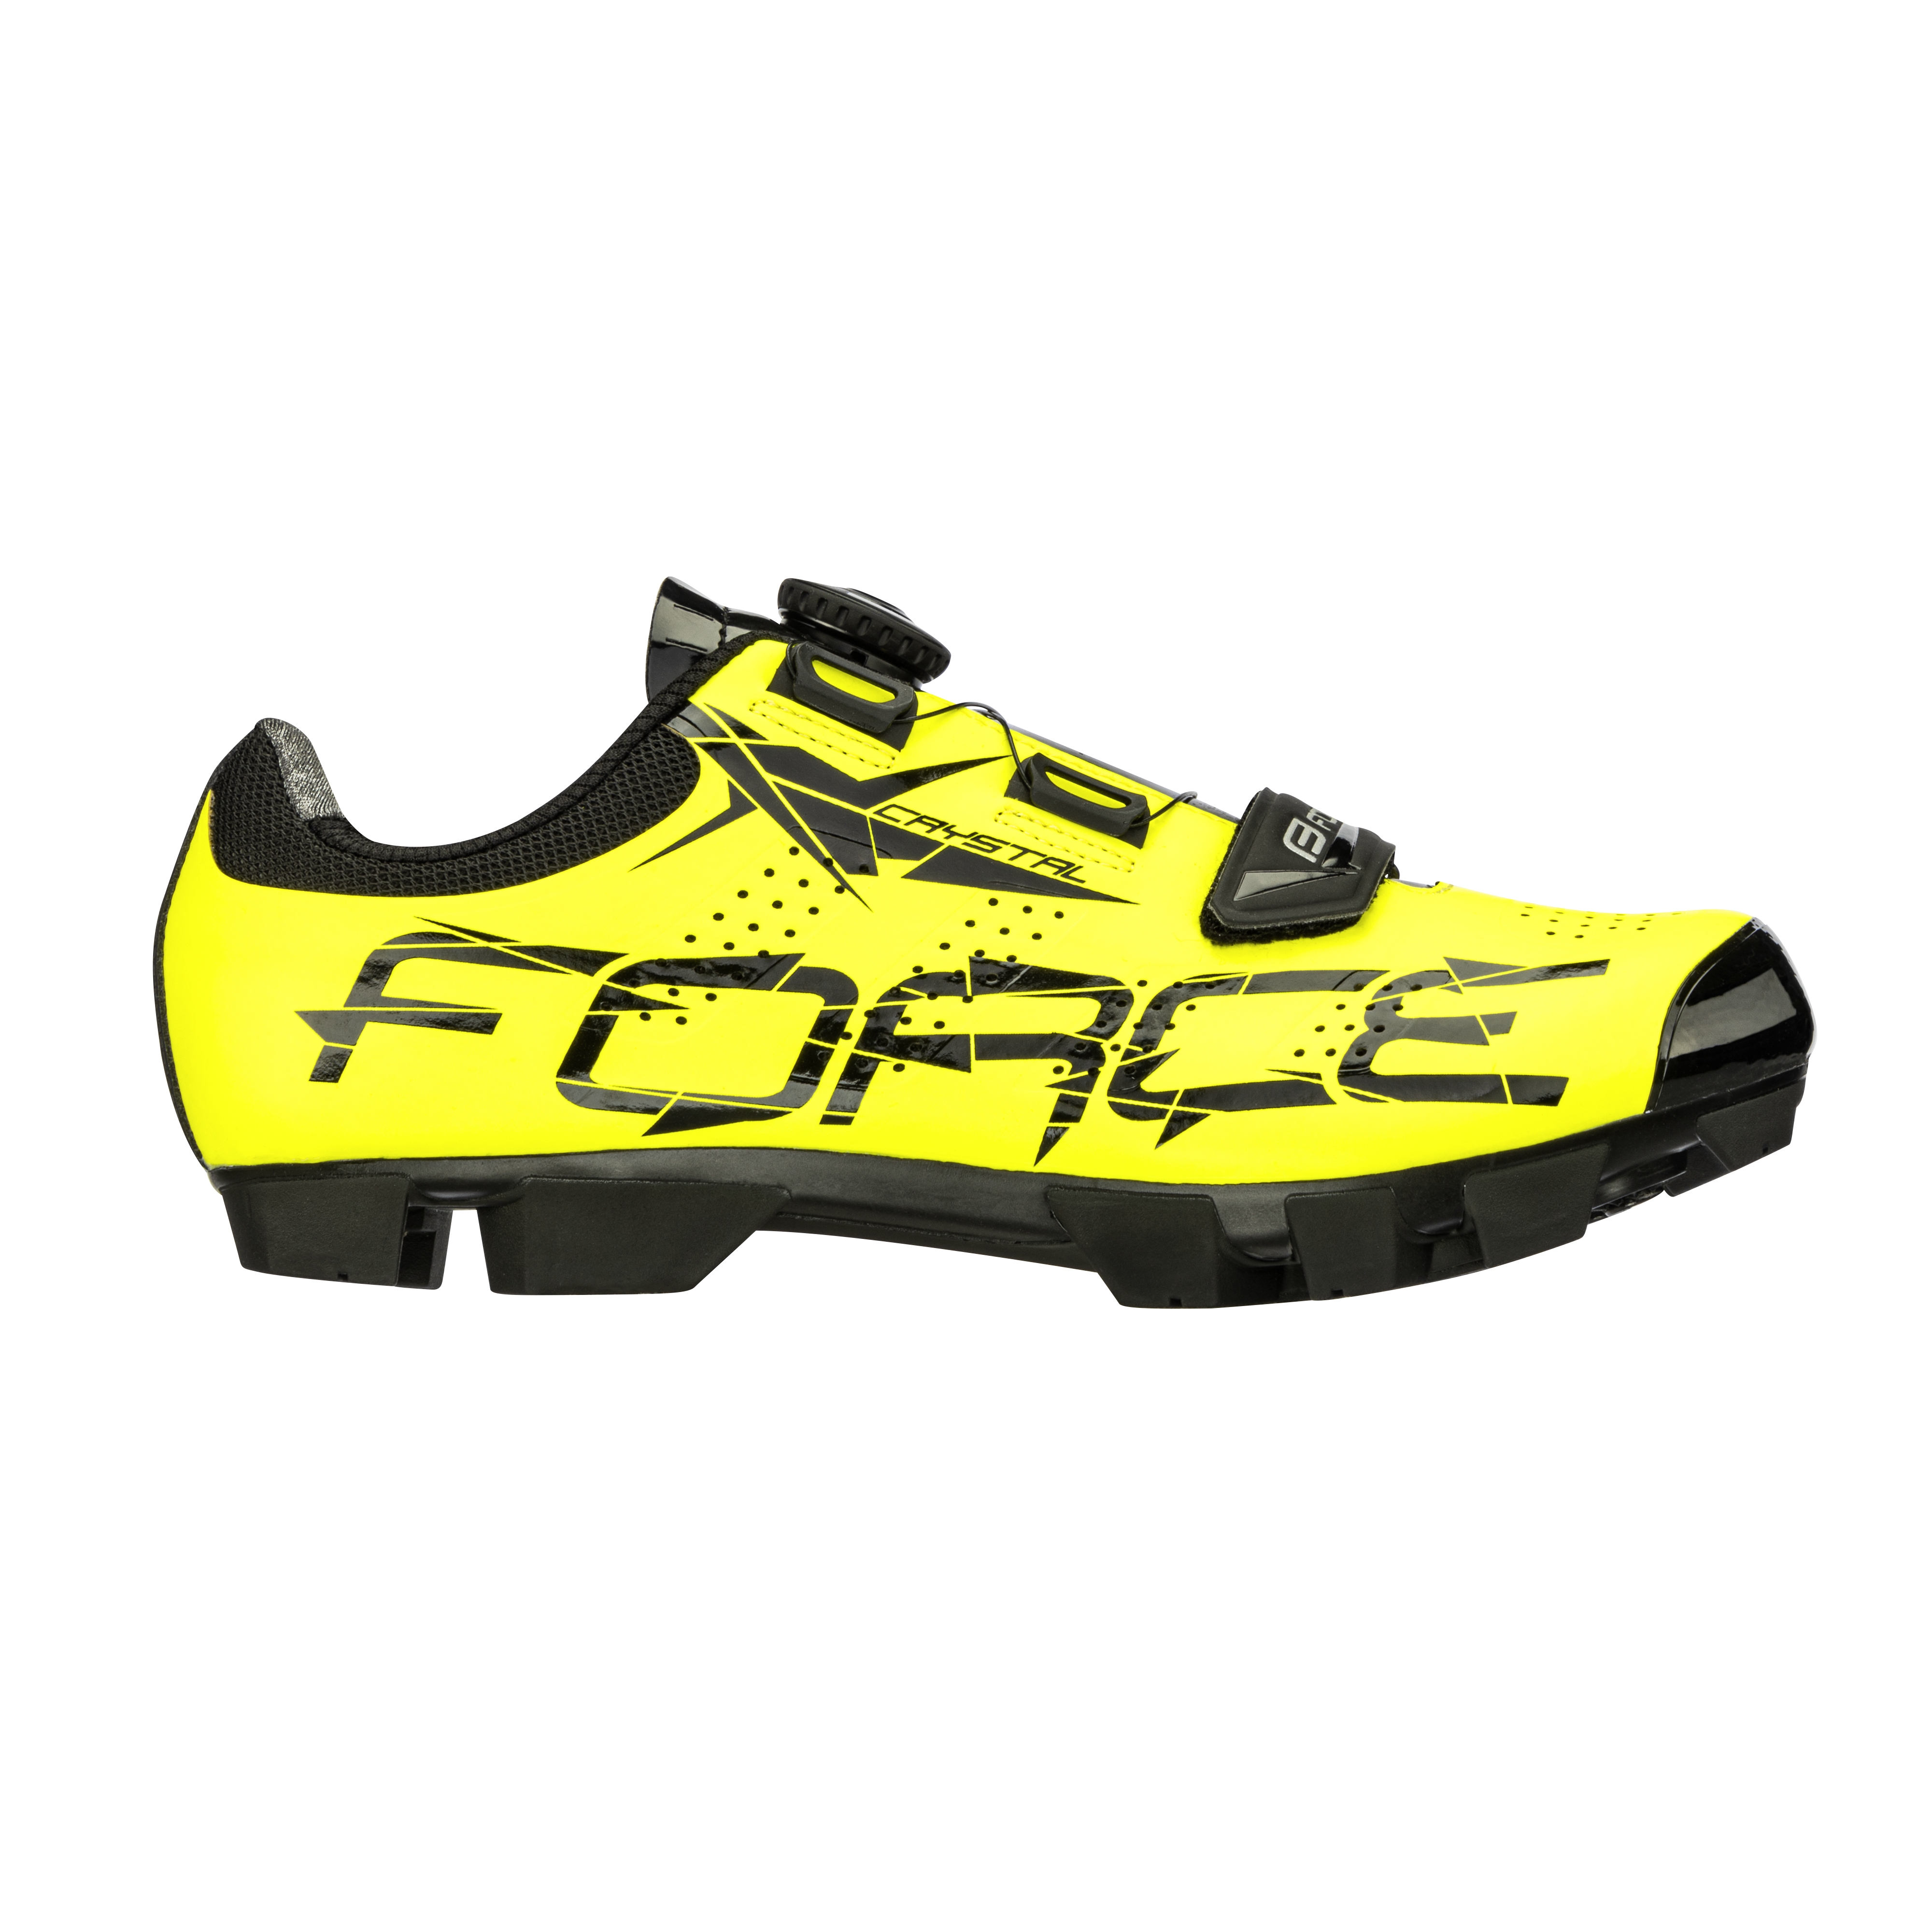 tretry FORCE MTB CRYSTAL, fluo 35